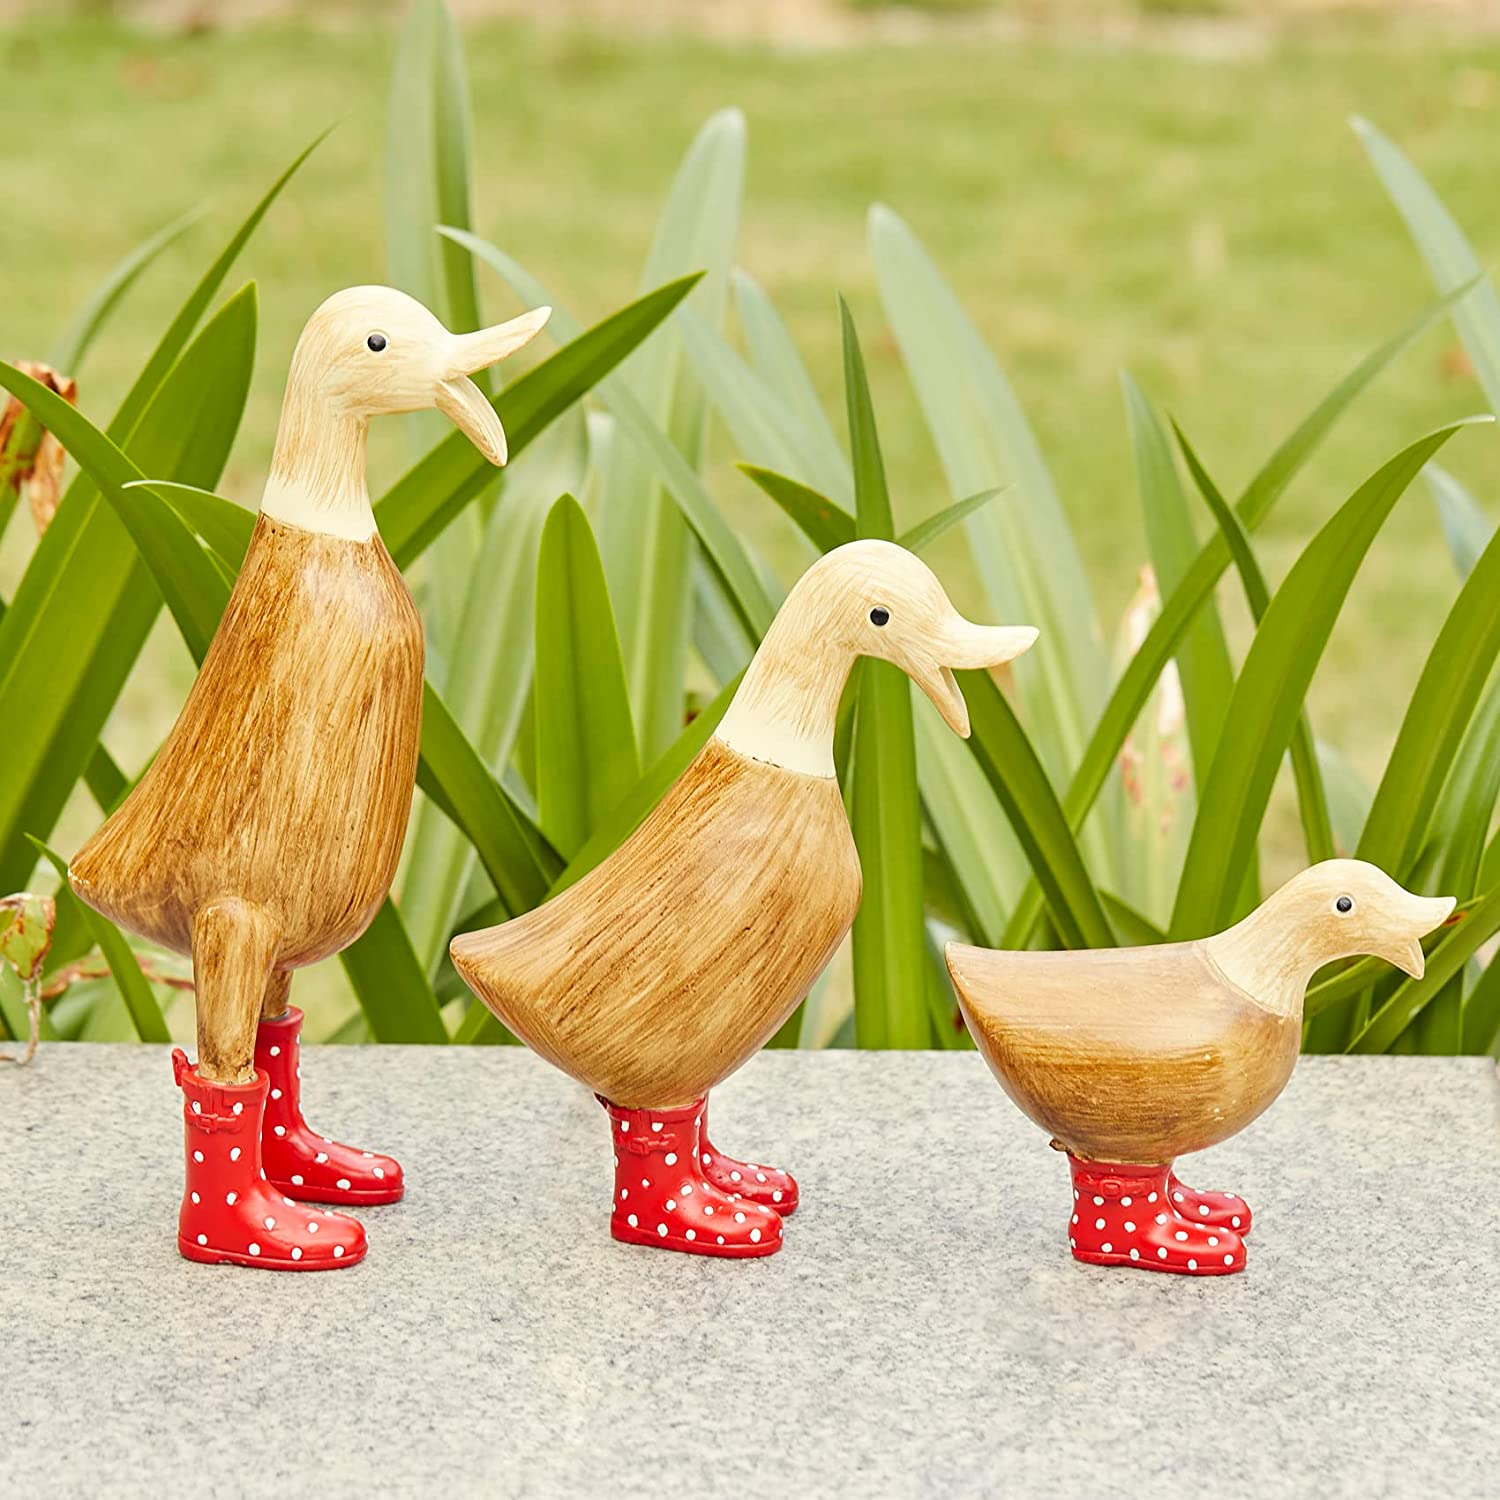 Three garden decors made out of wood with each one wearing red colored Wellington boots with white spots. 